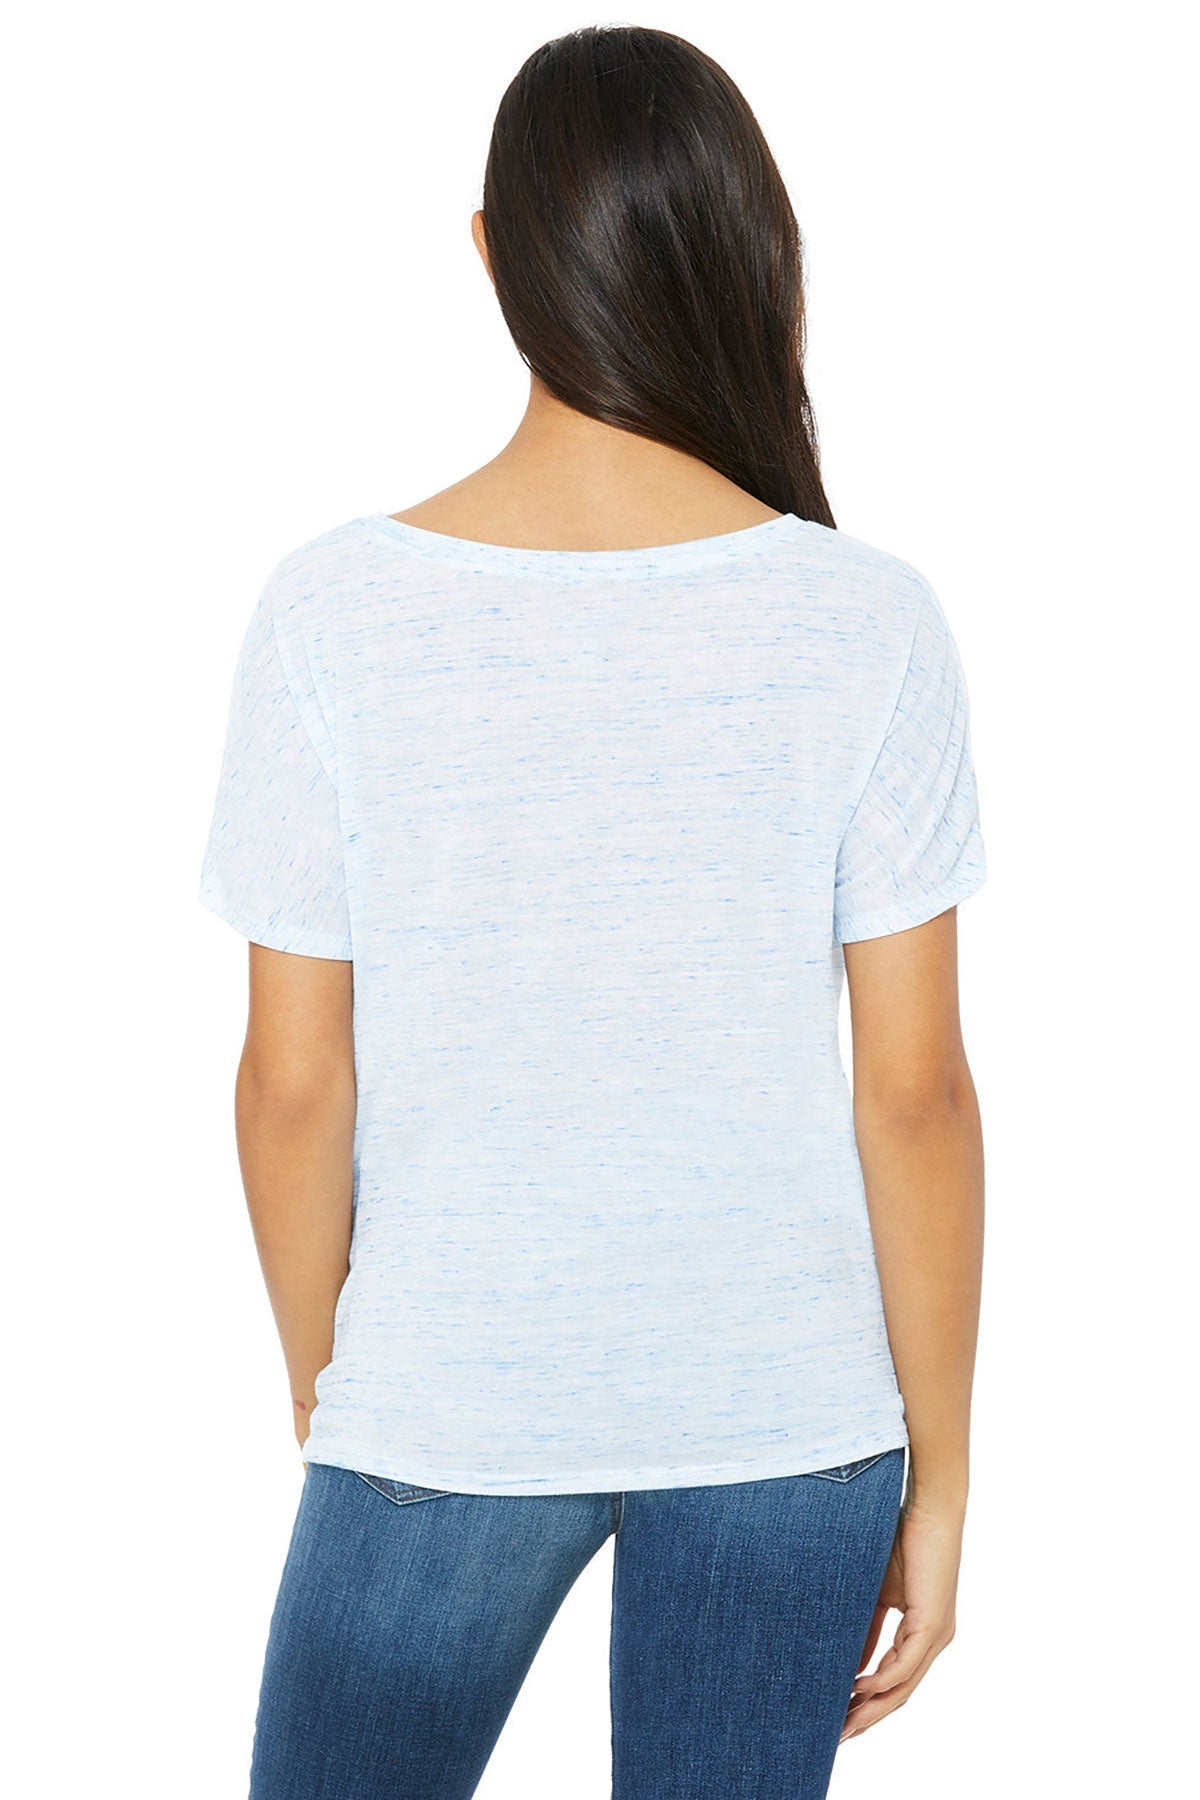 Bella Canvas Ladies Slouchy V-Neck T-Shirt, Blue Marble